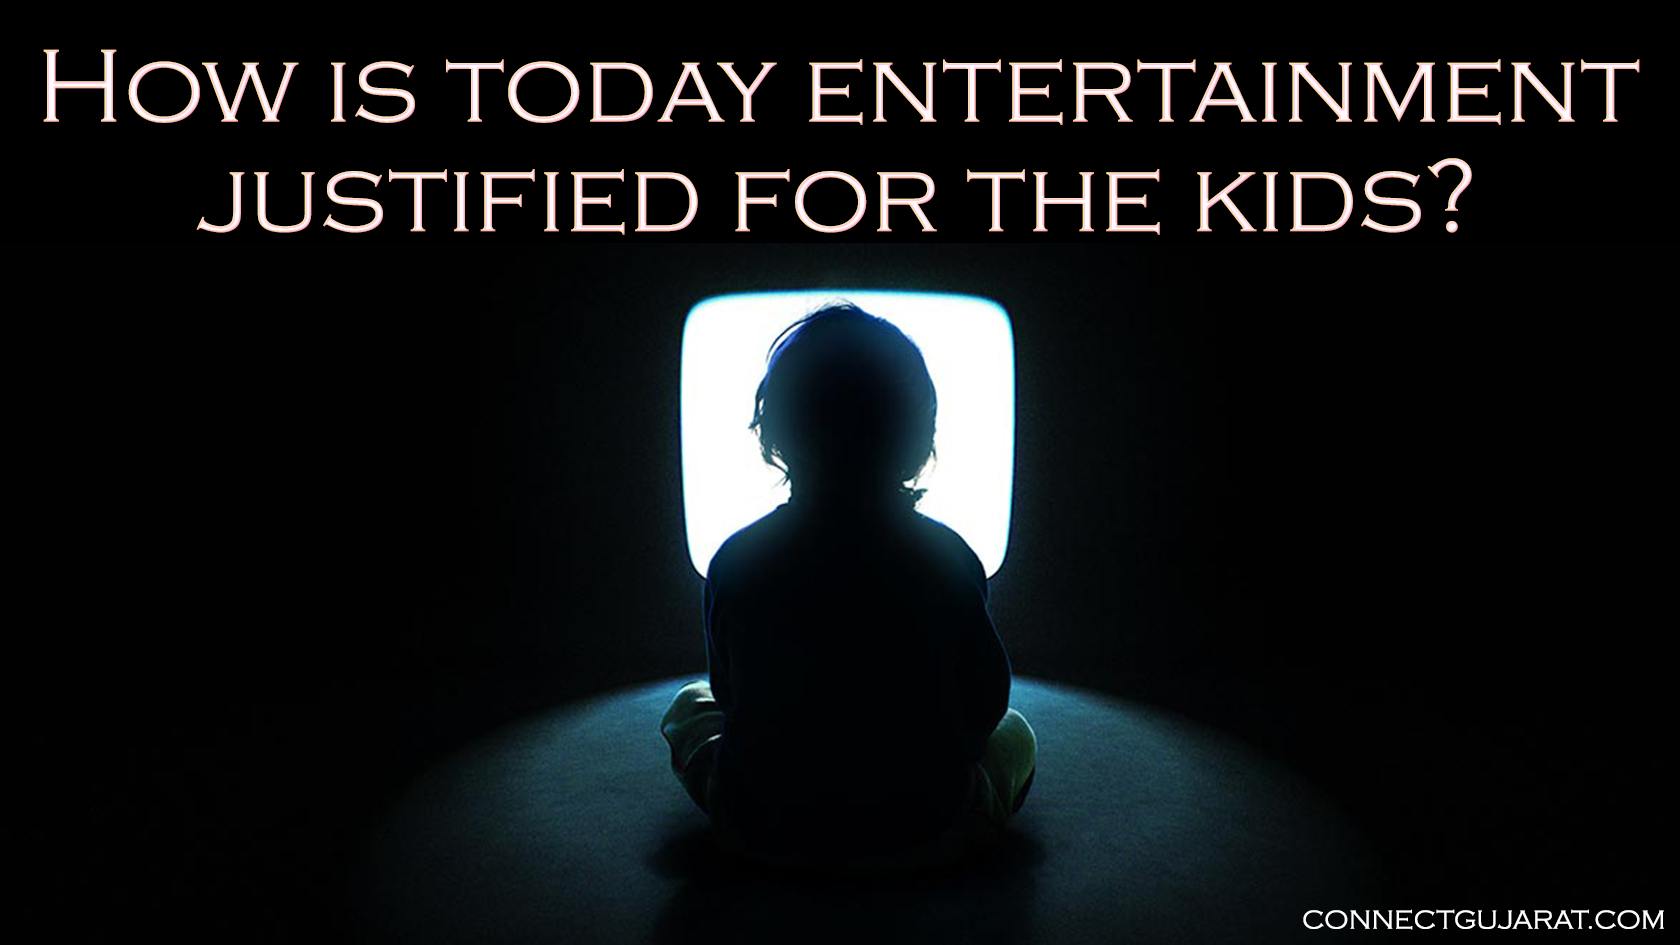 How is today entertainment justified for the kids